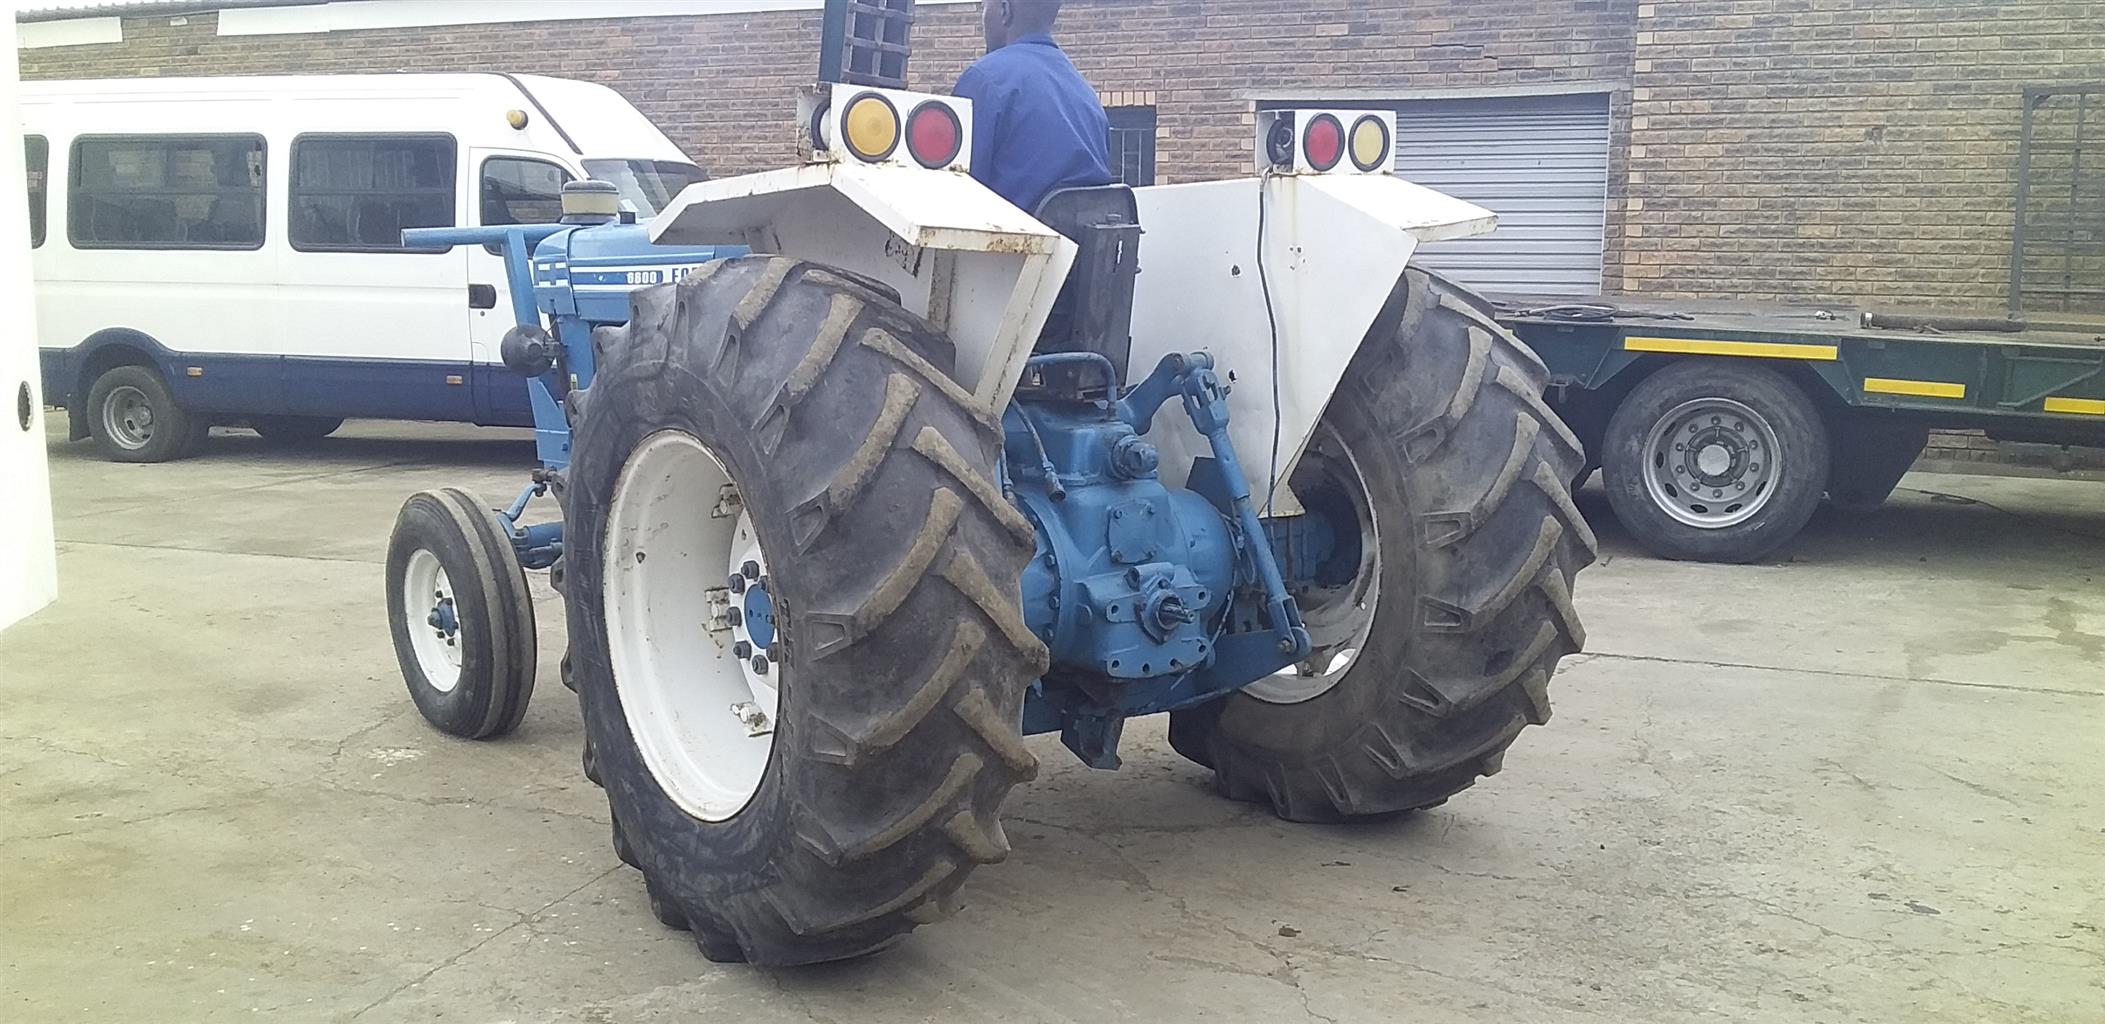 1986 FORD 6600 TRACTOR 